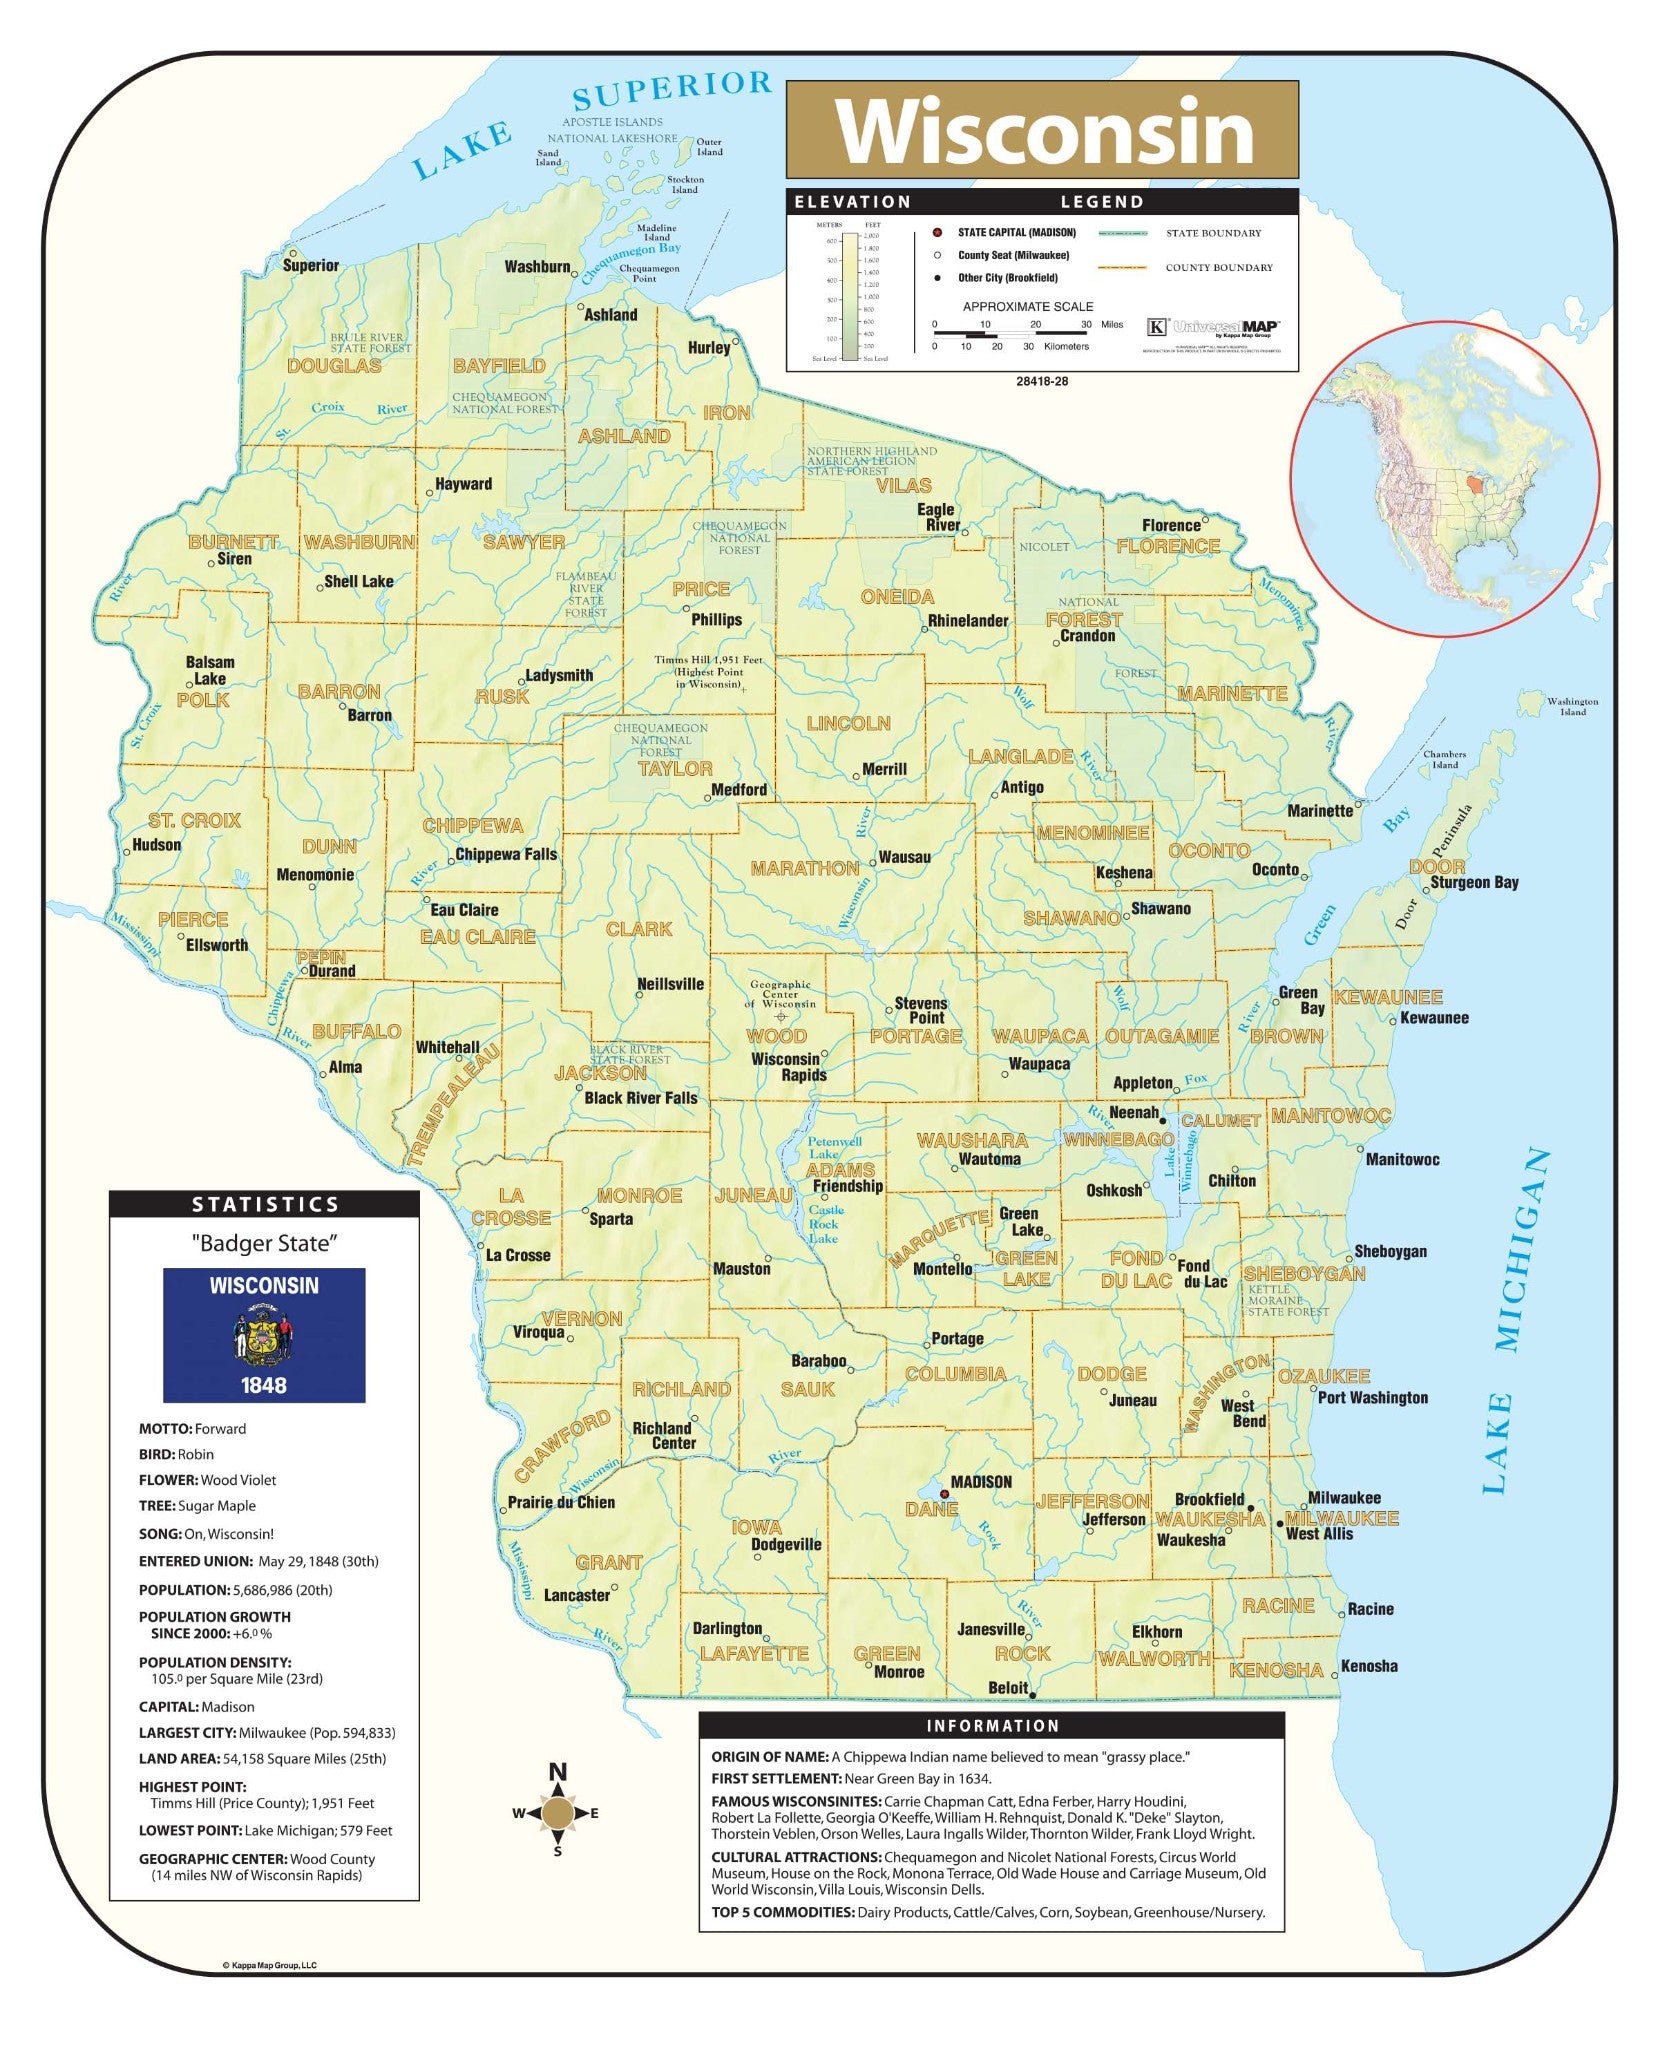 Kappa Map Group Wisconsin Shaded Relief Map